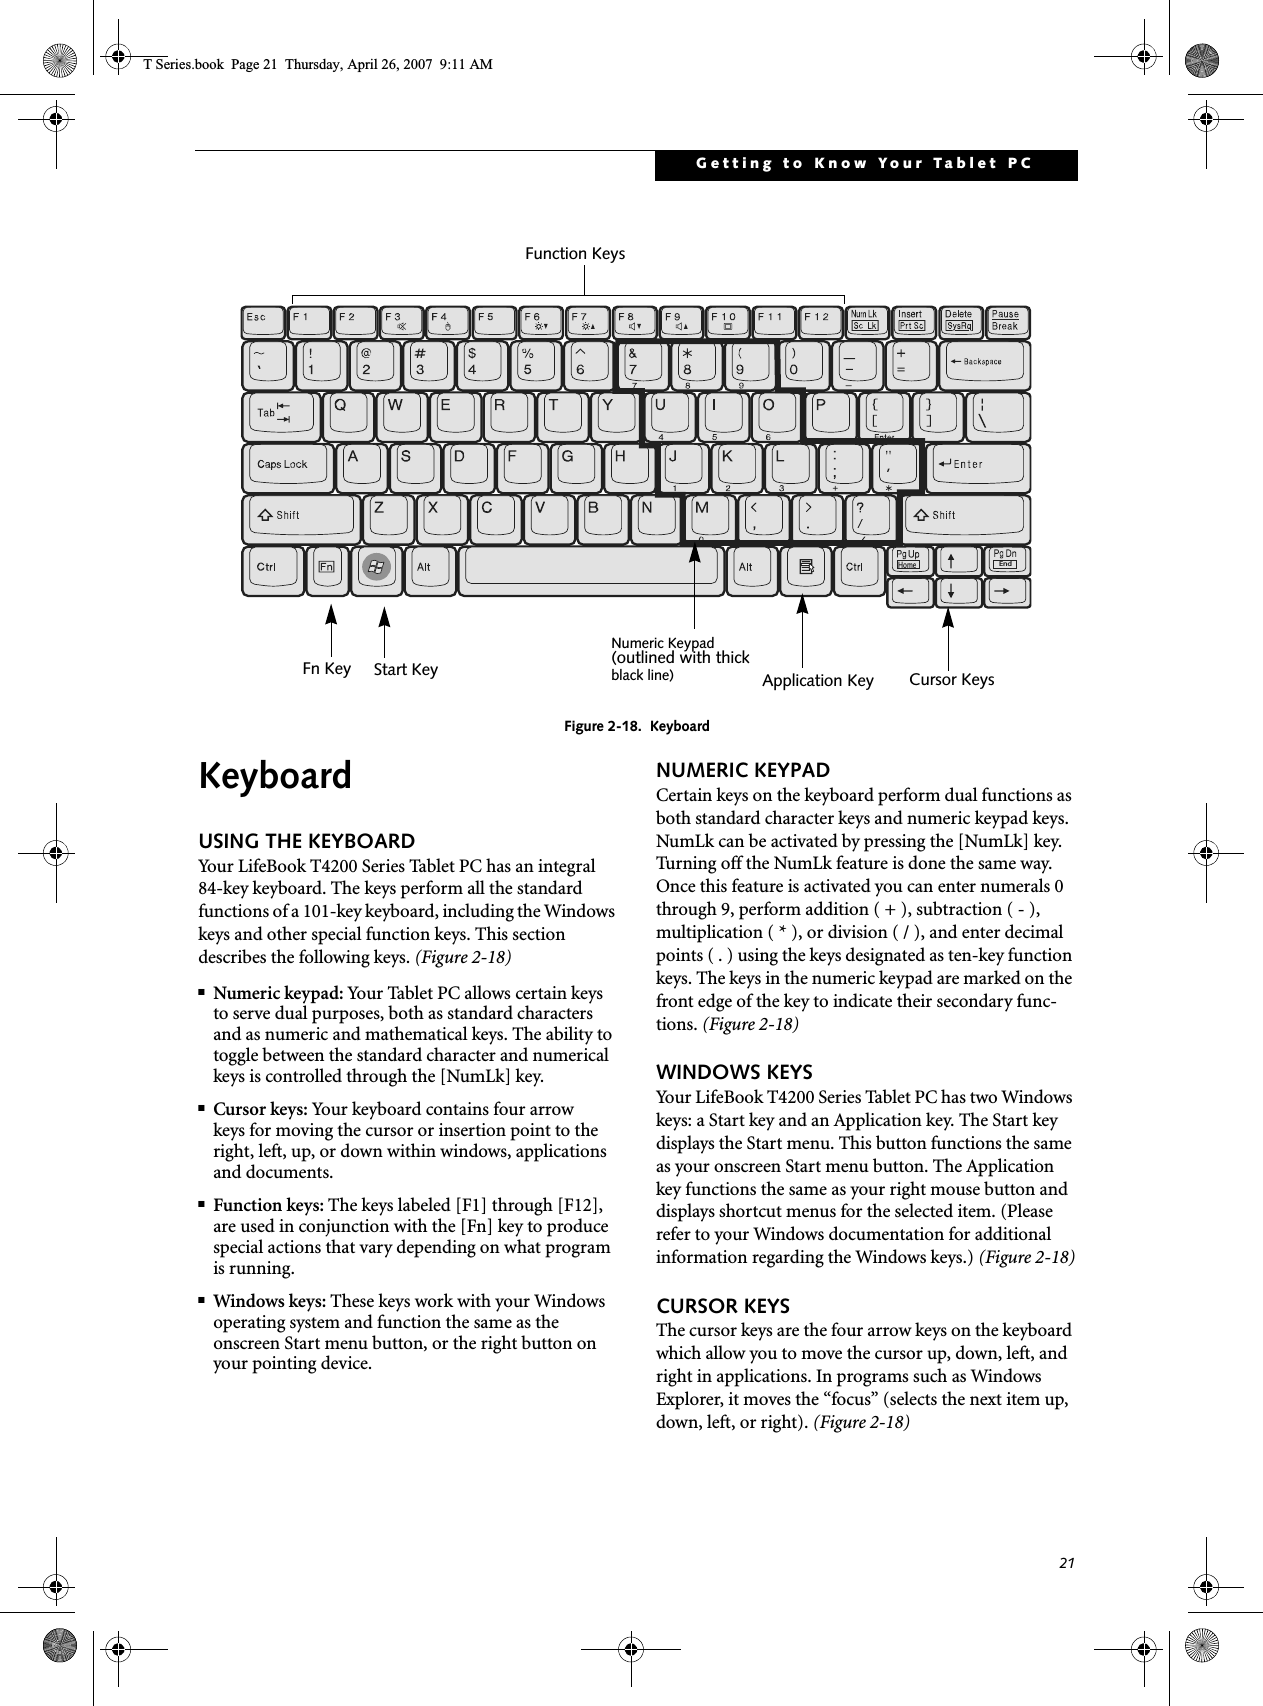 21Getting to Know Your Tablet PCFigure 2-18.  KeyboardKeyboardUSING THE KEYBOARDYour LifeBook T4200 Series Tablet PC has an integral 84-key keyboard. The keys perform all the standard functions of a 101-key keyboard, including the Windows keys and other special function keys. This section describes the following keys. (Figure 2-18)■Numeric keypad: Your Tablet PC allows certain keys to serve dual purposes, both as standard characters and as numeric and mathematical keys. The ability to toggle between the standard character and numerical keys is controlled through the [NumLk] key.■Cursor keys: Your keyboard contains four arrowkeys for moving the cursor or insertion point to the right, left, up, or down within windows, applications and documents. ■Function keys: The keys labeled [F1] through [F12], are used in conjunction with the [Fn] key to produce special actions that vary depending on what program is running. ■Windows keys: These keys work with your Windows operating system and function the same as the onscreen Start menu button, or the right button on your pointing device.NUMERIC KEYPADCertain keys on the keyboard perform dual functions as both standard character keys and numeric keypad keys. NumLk can be activated by pressing the [NumLk] key. Turning off the NumLk feature is done the same way. Once this feature is activated you can enter numerals 0 through 9, perform addition ( + ), subtraction ( - ),multiplication ( * ), or division ( / ), and enter decimal points ( . ) using the keys designated as ten-key function keys. The keys in the numeric keypad are marked on the front edge of the key to indicate their secondary func-tions. (Figure 2-18) WINDOWS KEYSYour LifeBook T4200 Series Tablet PC has two Windows keys: a Start key and an Application key. The Start key displays the Start menu. This button functions the same as your onscreen Start menu button. The Application key functions the same as your right mouse button and displays shortcut menus for the selected item. (Please refer to your Windows documentation for additional information regarding the Windows keys.) (Figure 2-18)CURSOR KEYSThe cursor keys are the four arrow keys on the keyboard which allow you to move the cursor up, down, left, and right in applications. In programs such as Windows Explorer, it moves the “focus” (selects the next item up, down, left, or right). (Figure 2-18)EndHomeFn Key Start KeyFunction KeysNumeric KeypadApplication Key Cursor Keys(outlined with thickblack line) T Series.book  Page 21  Thursday, April 26, 2007  9:11 AM